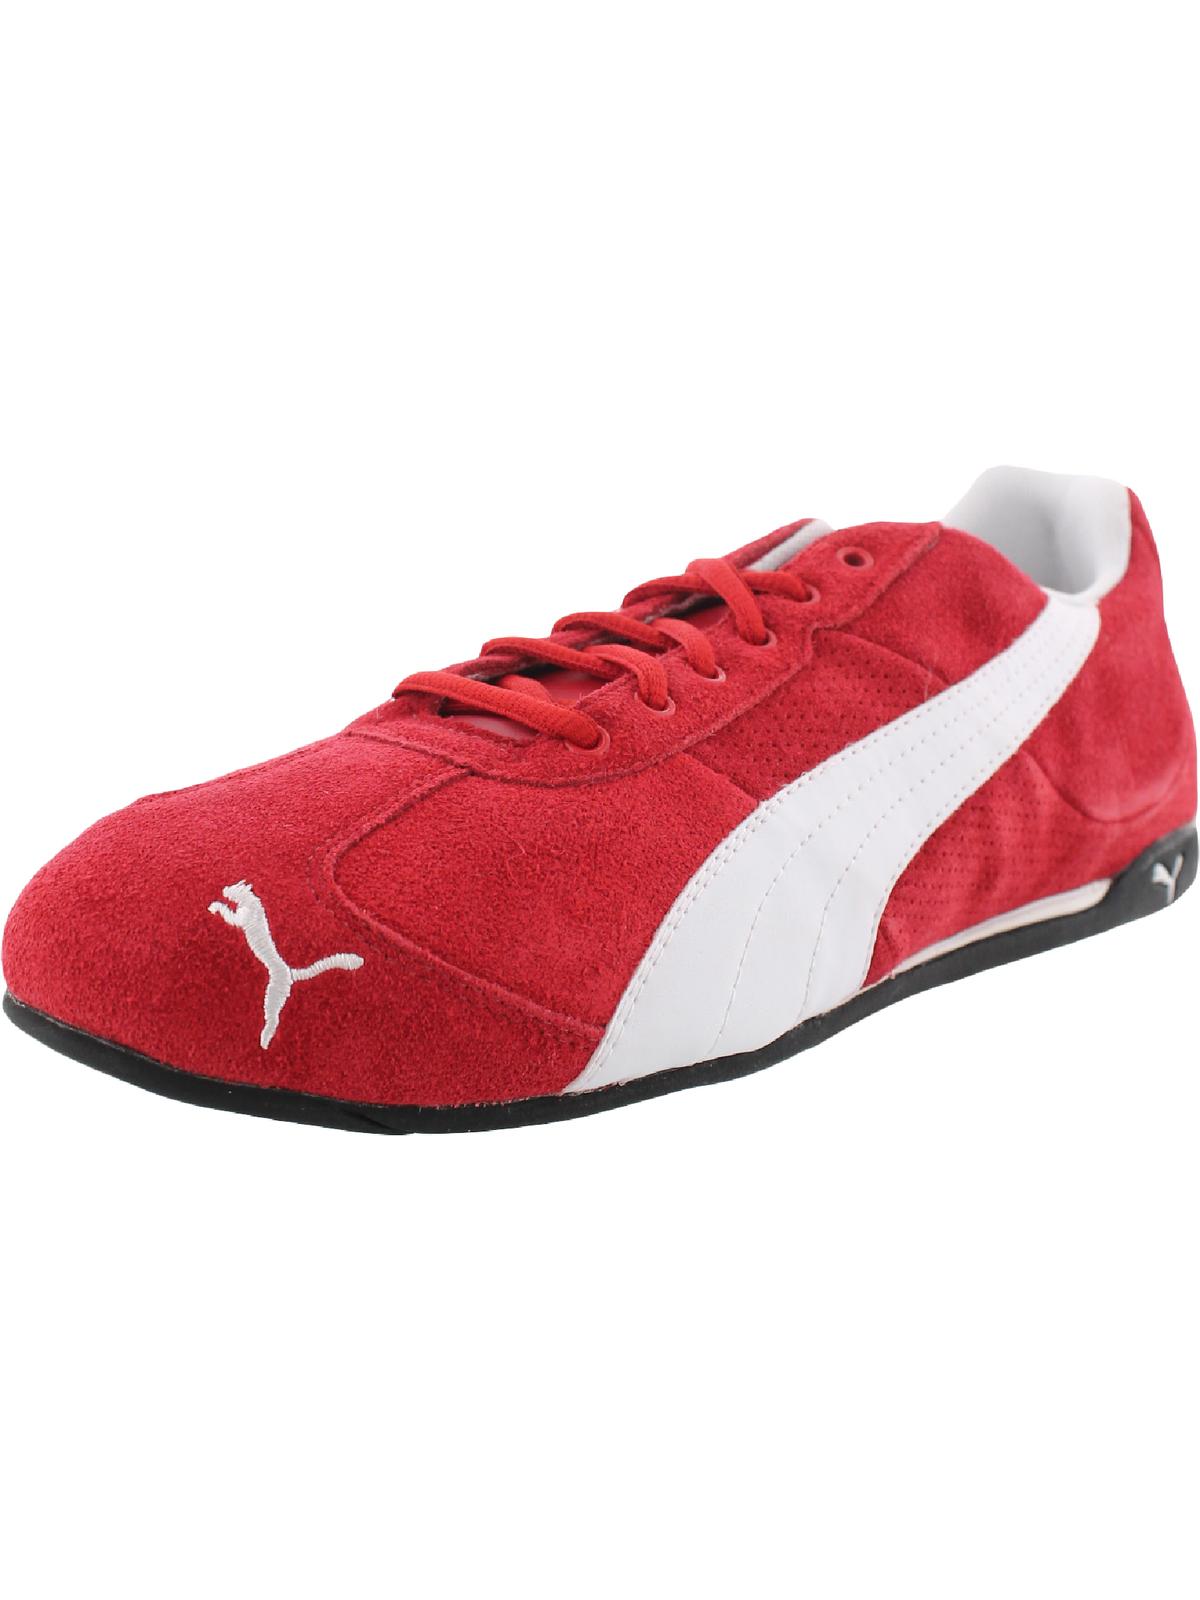 Puma Repli Cat Iii Mens Trainer Sneaker Athletic Training Shoes In Red | ModeSens